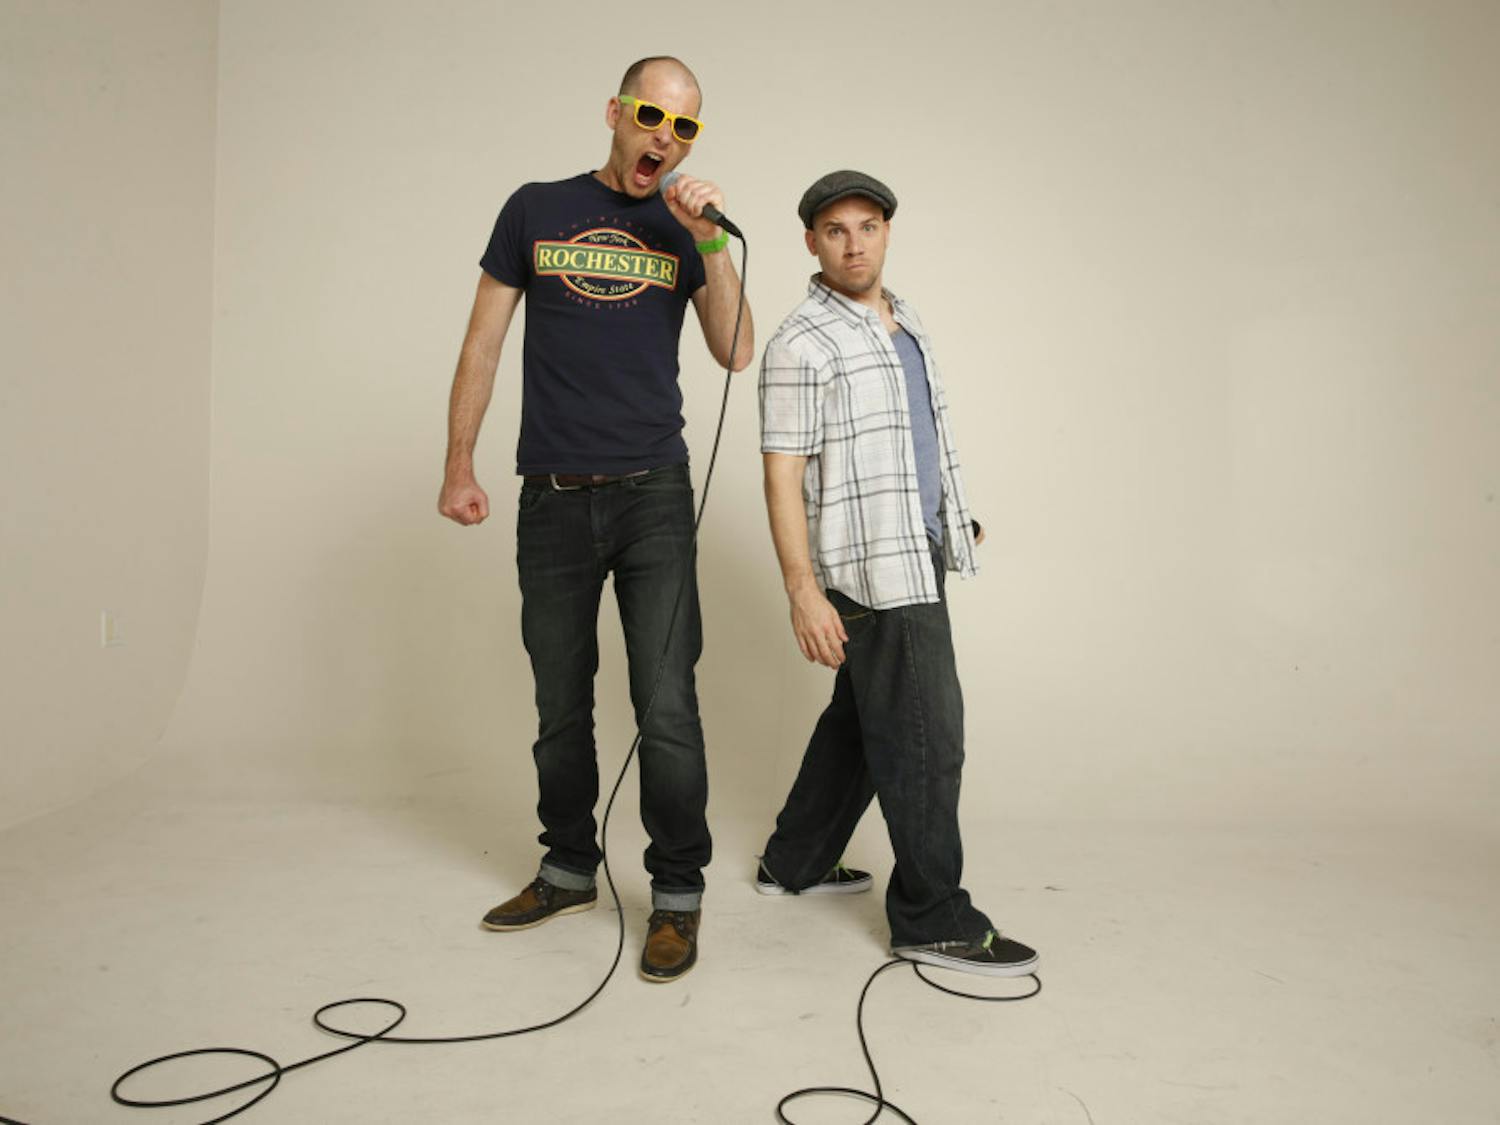 Comedians Peter Shukoff and Lloyd Ahlquist are best known for their YouTube channel, Epic Rap Battles of History. Now, they’re taking their act on tour.